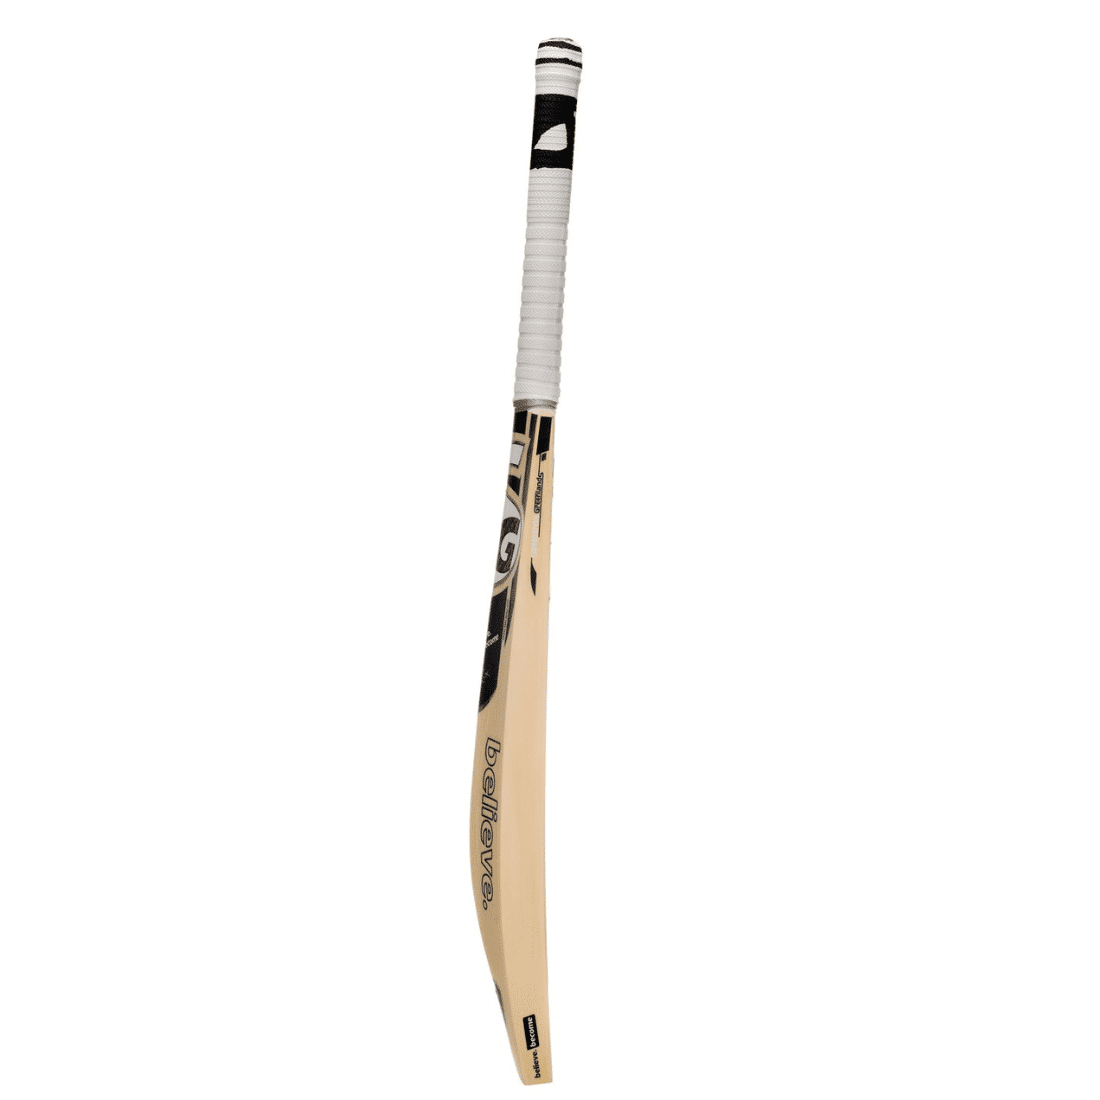 SG Roar LE English Willow Cricket Bat – Sports Wing | Shop on